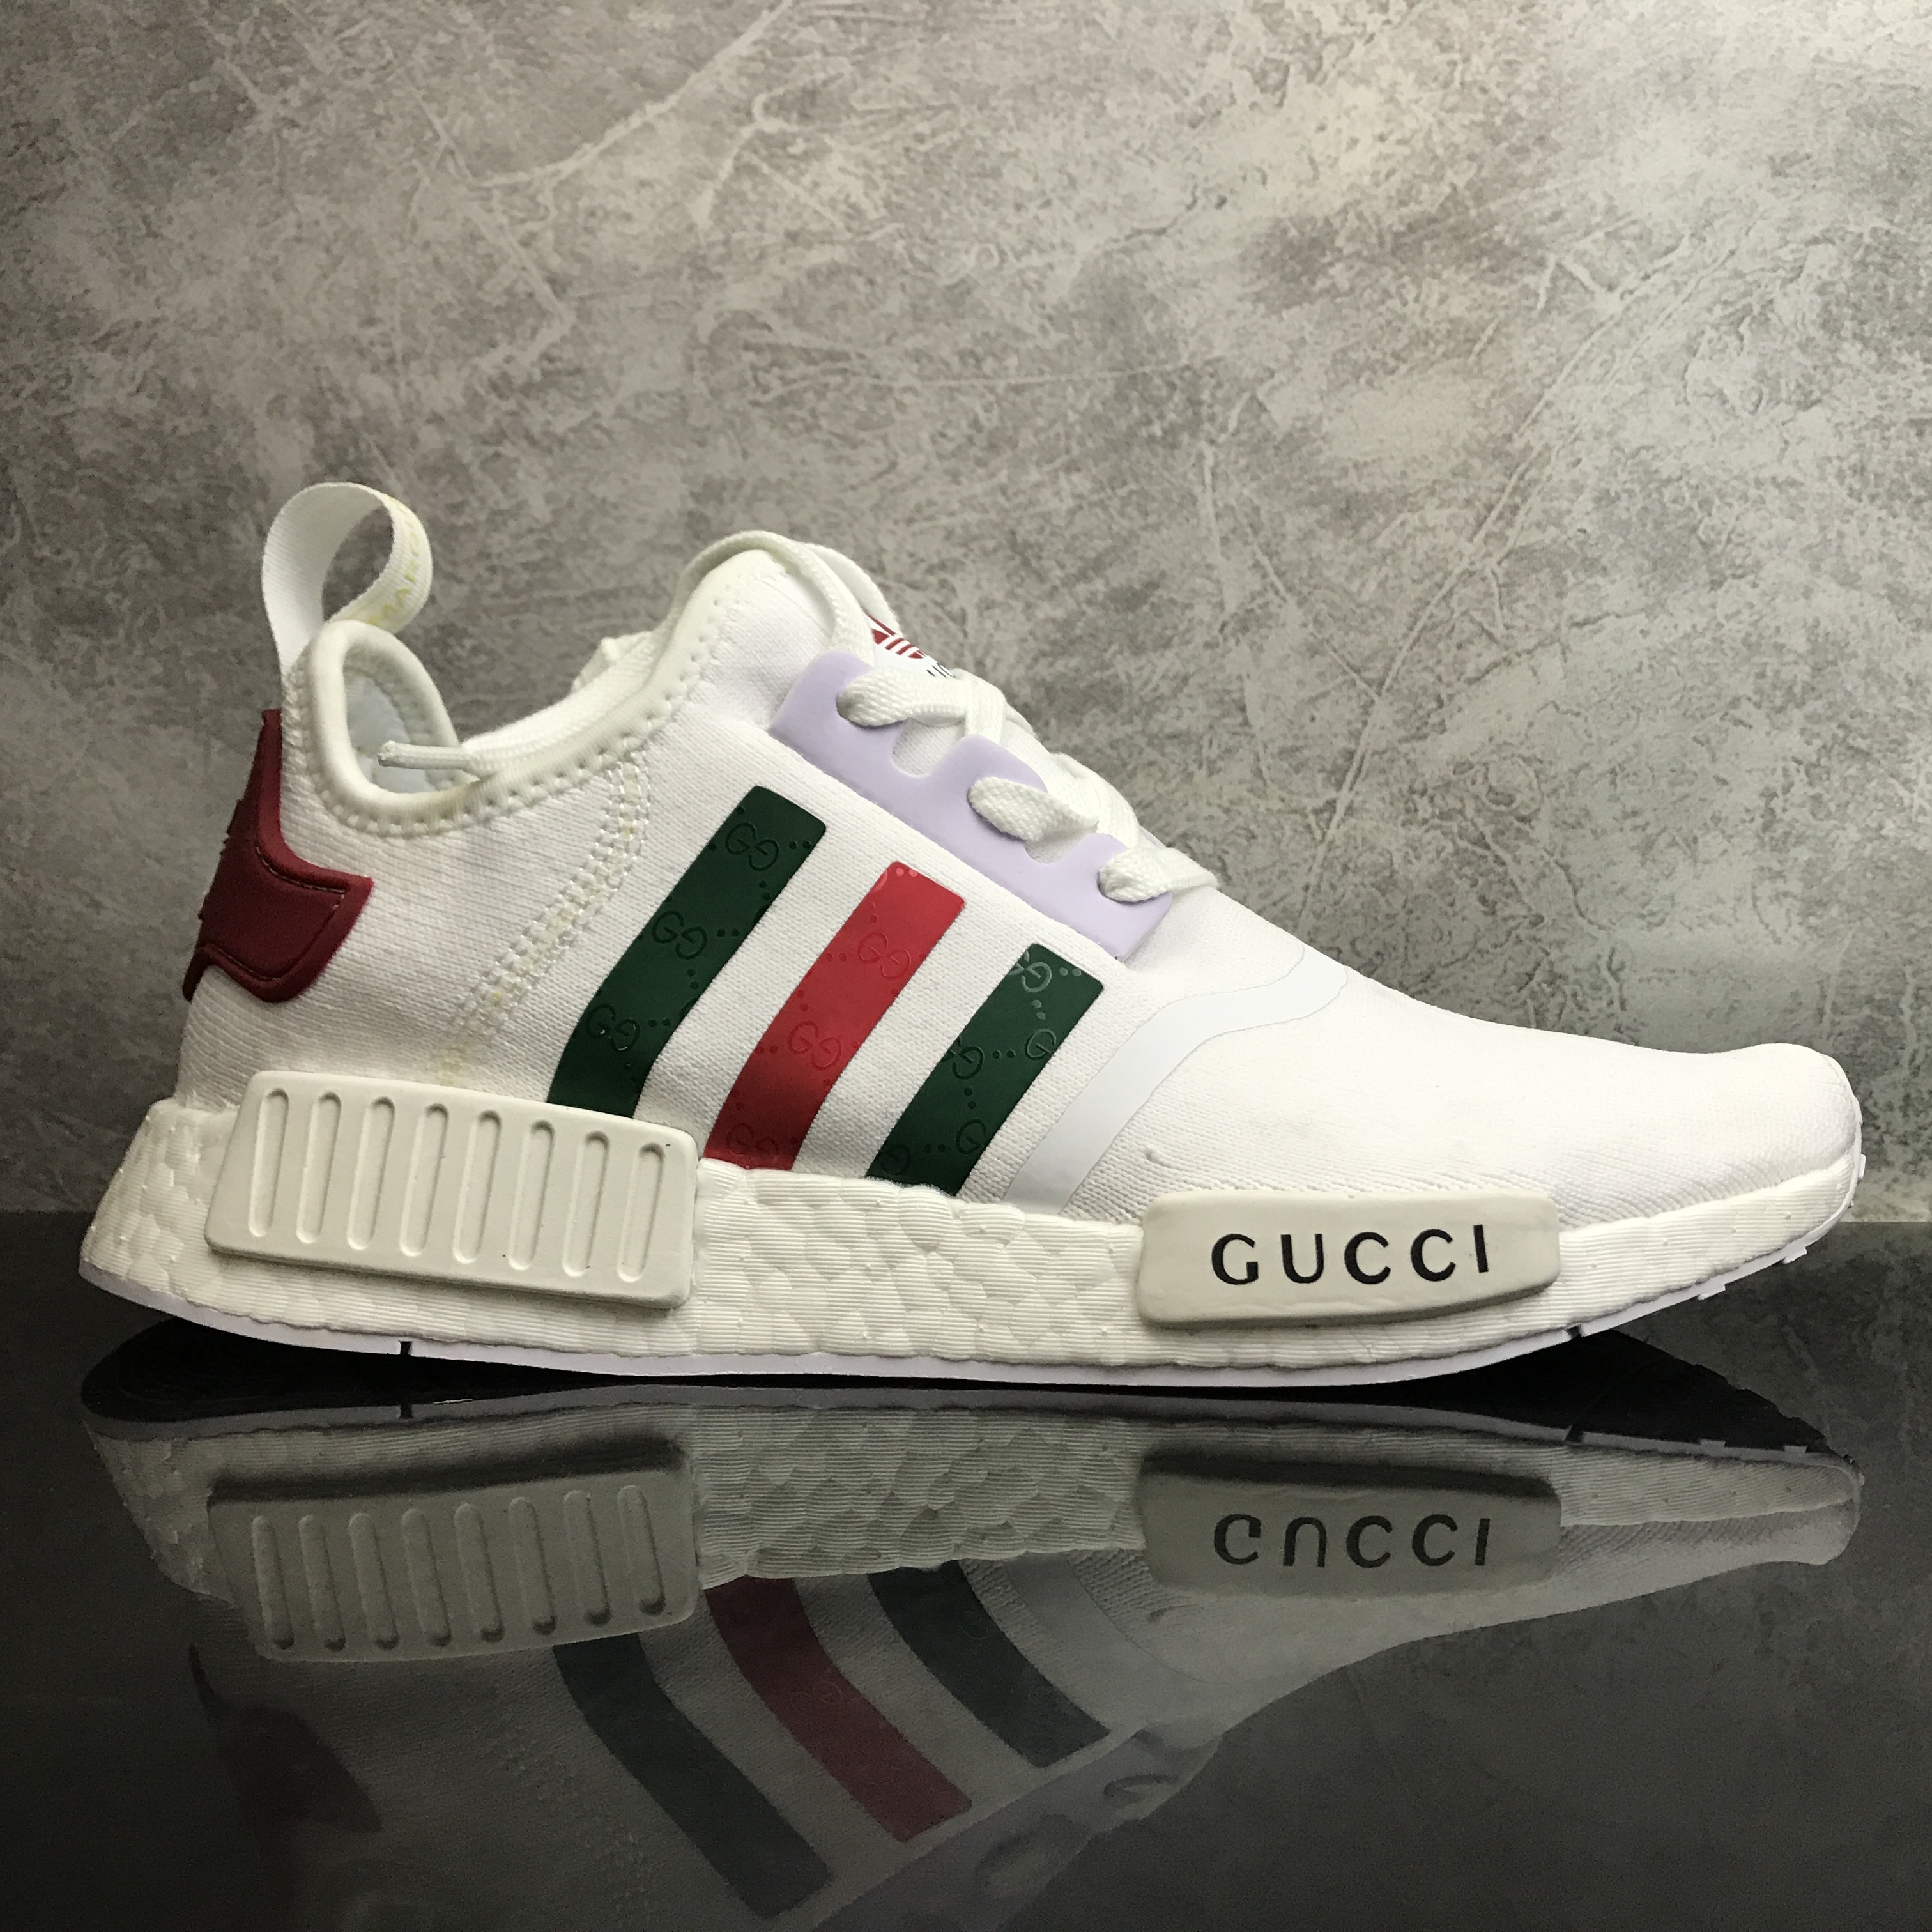 ADIDAS NMD R1 PRIMEKNIT GUCCI BEE SHOES 1 1 Preorders on